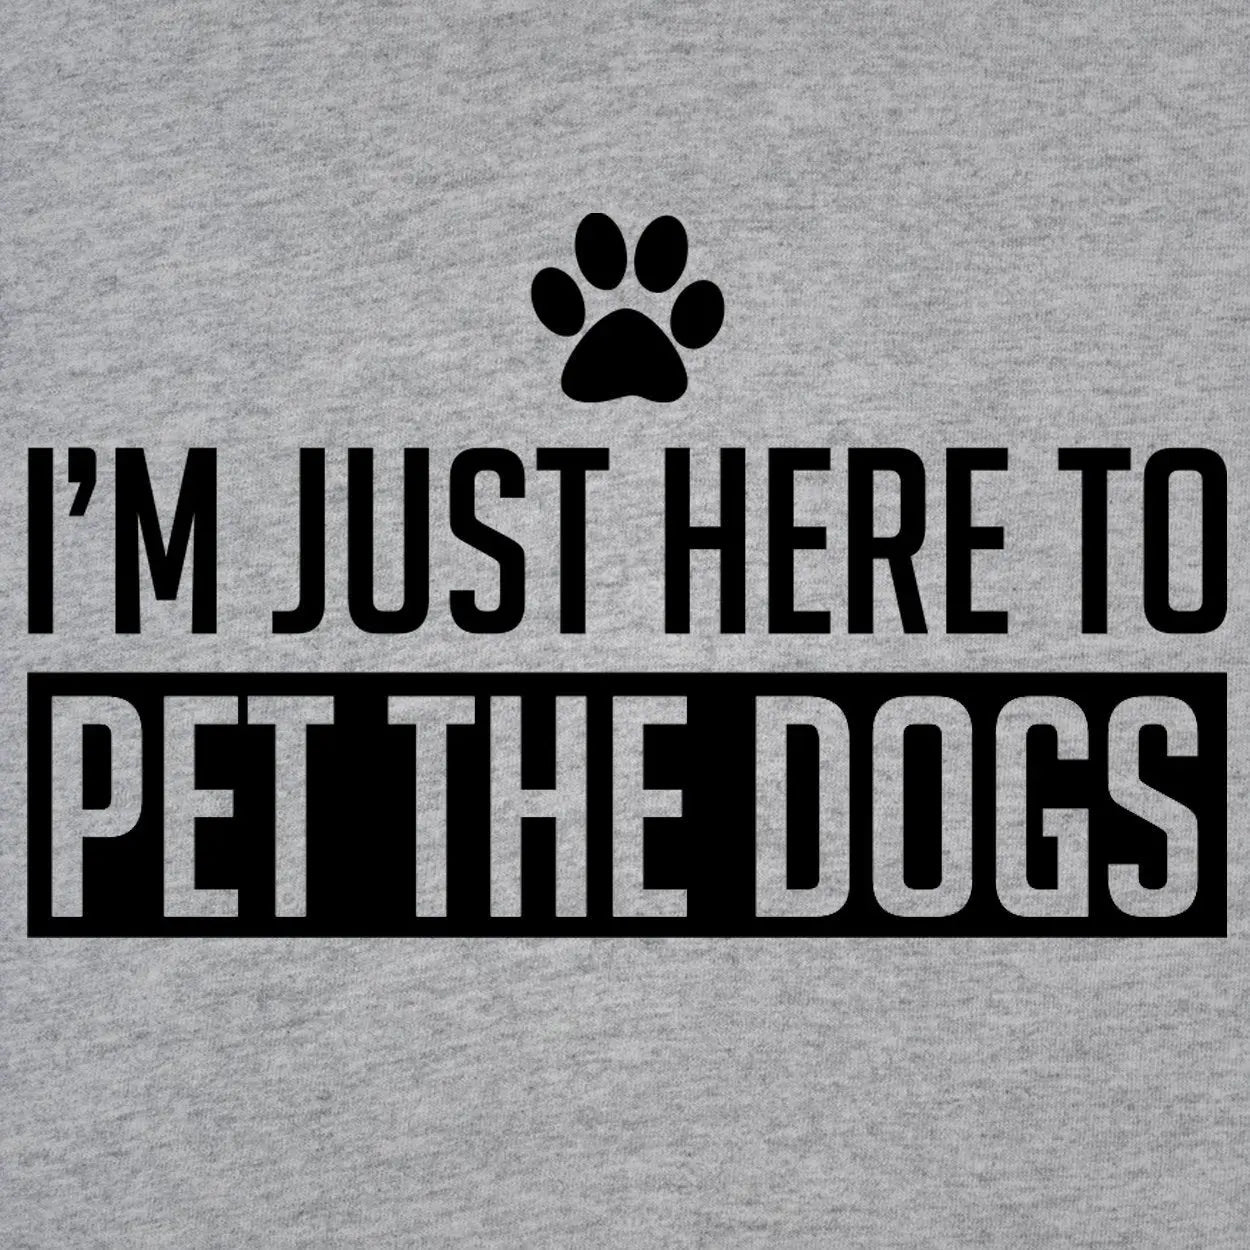 Just Here To Pet The Dogs Tshirt - Donkey Tees